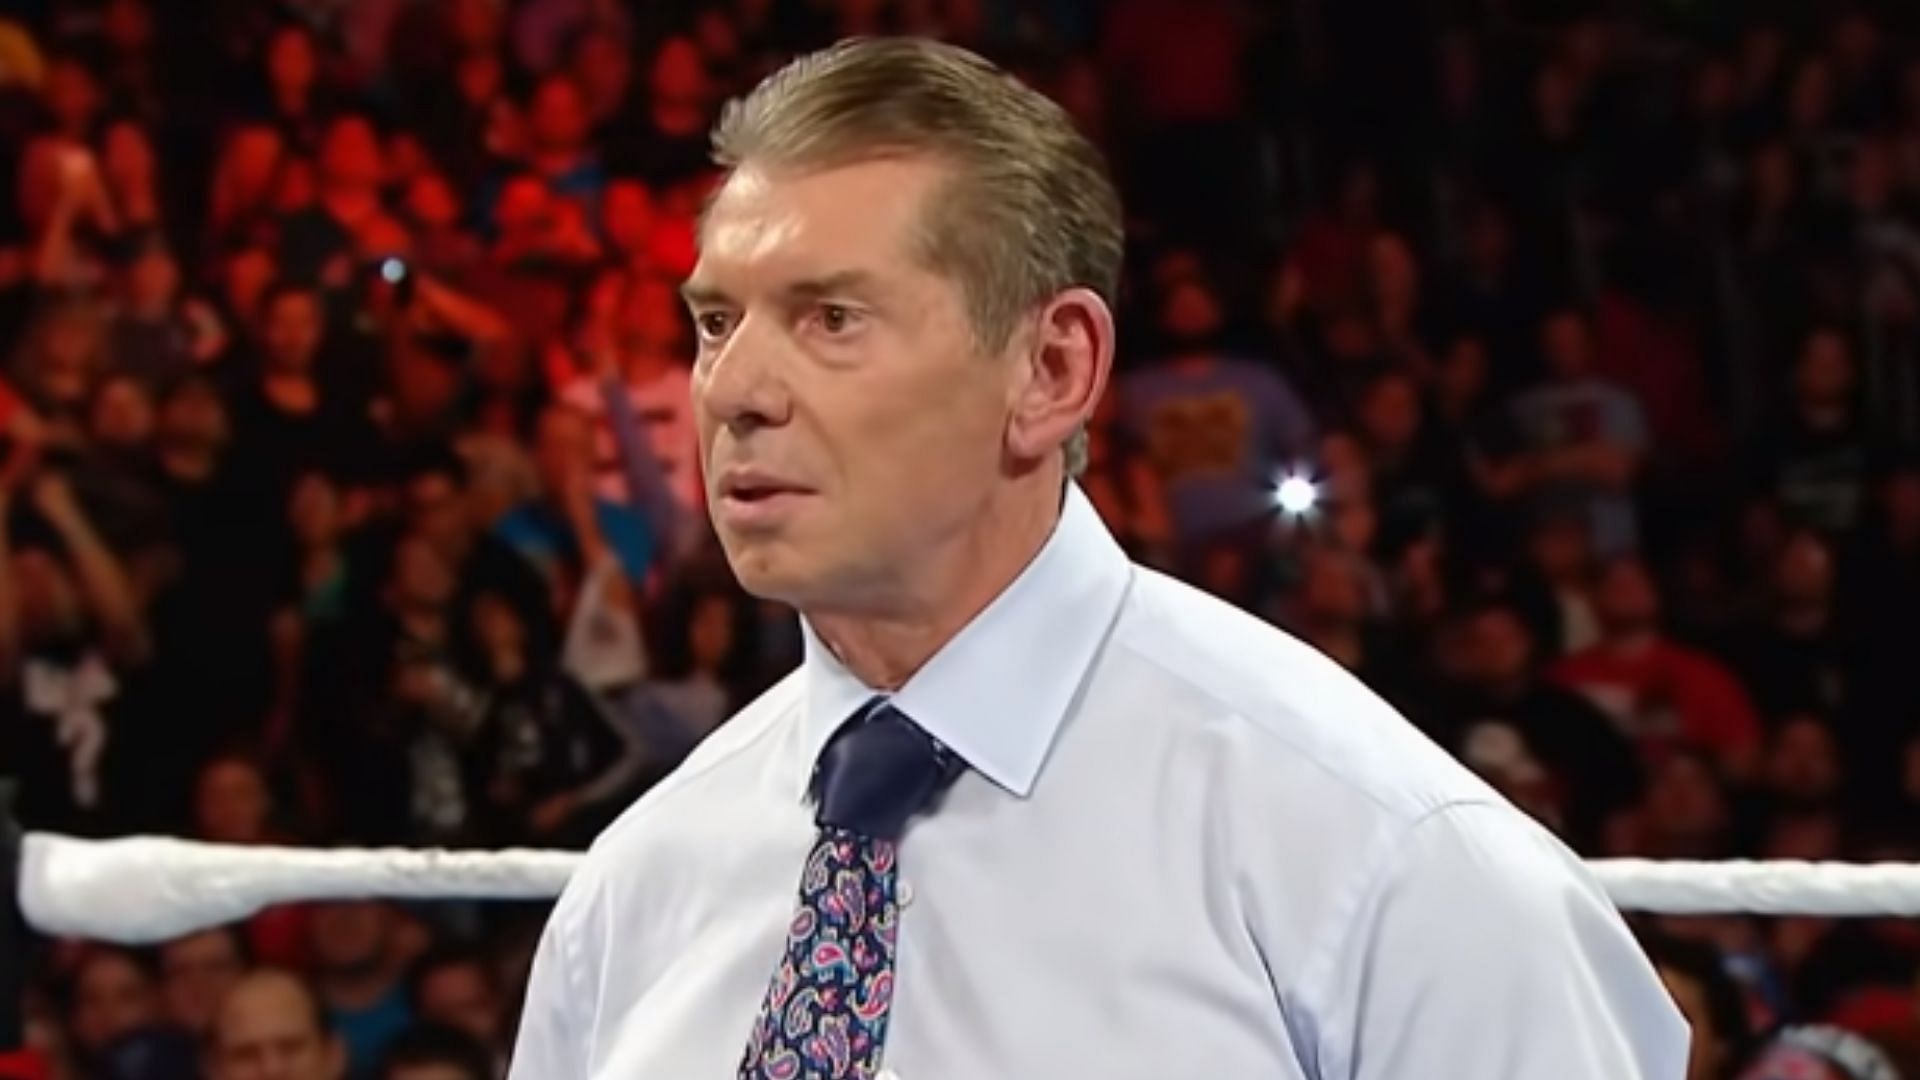 Vince McMahon and Shawn Michaels had a disagreement before WrestleMania 14